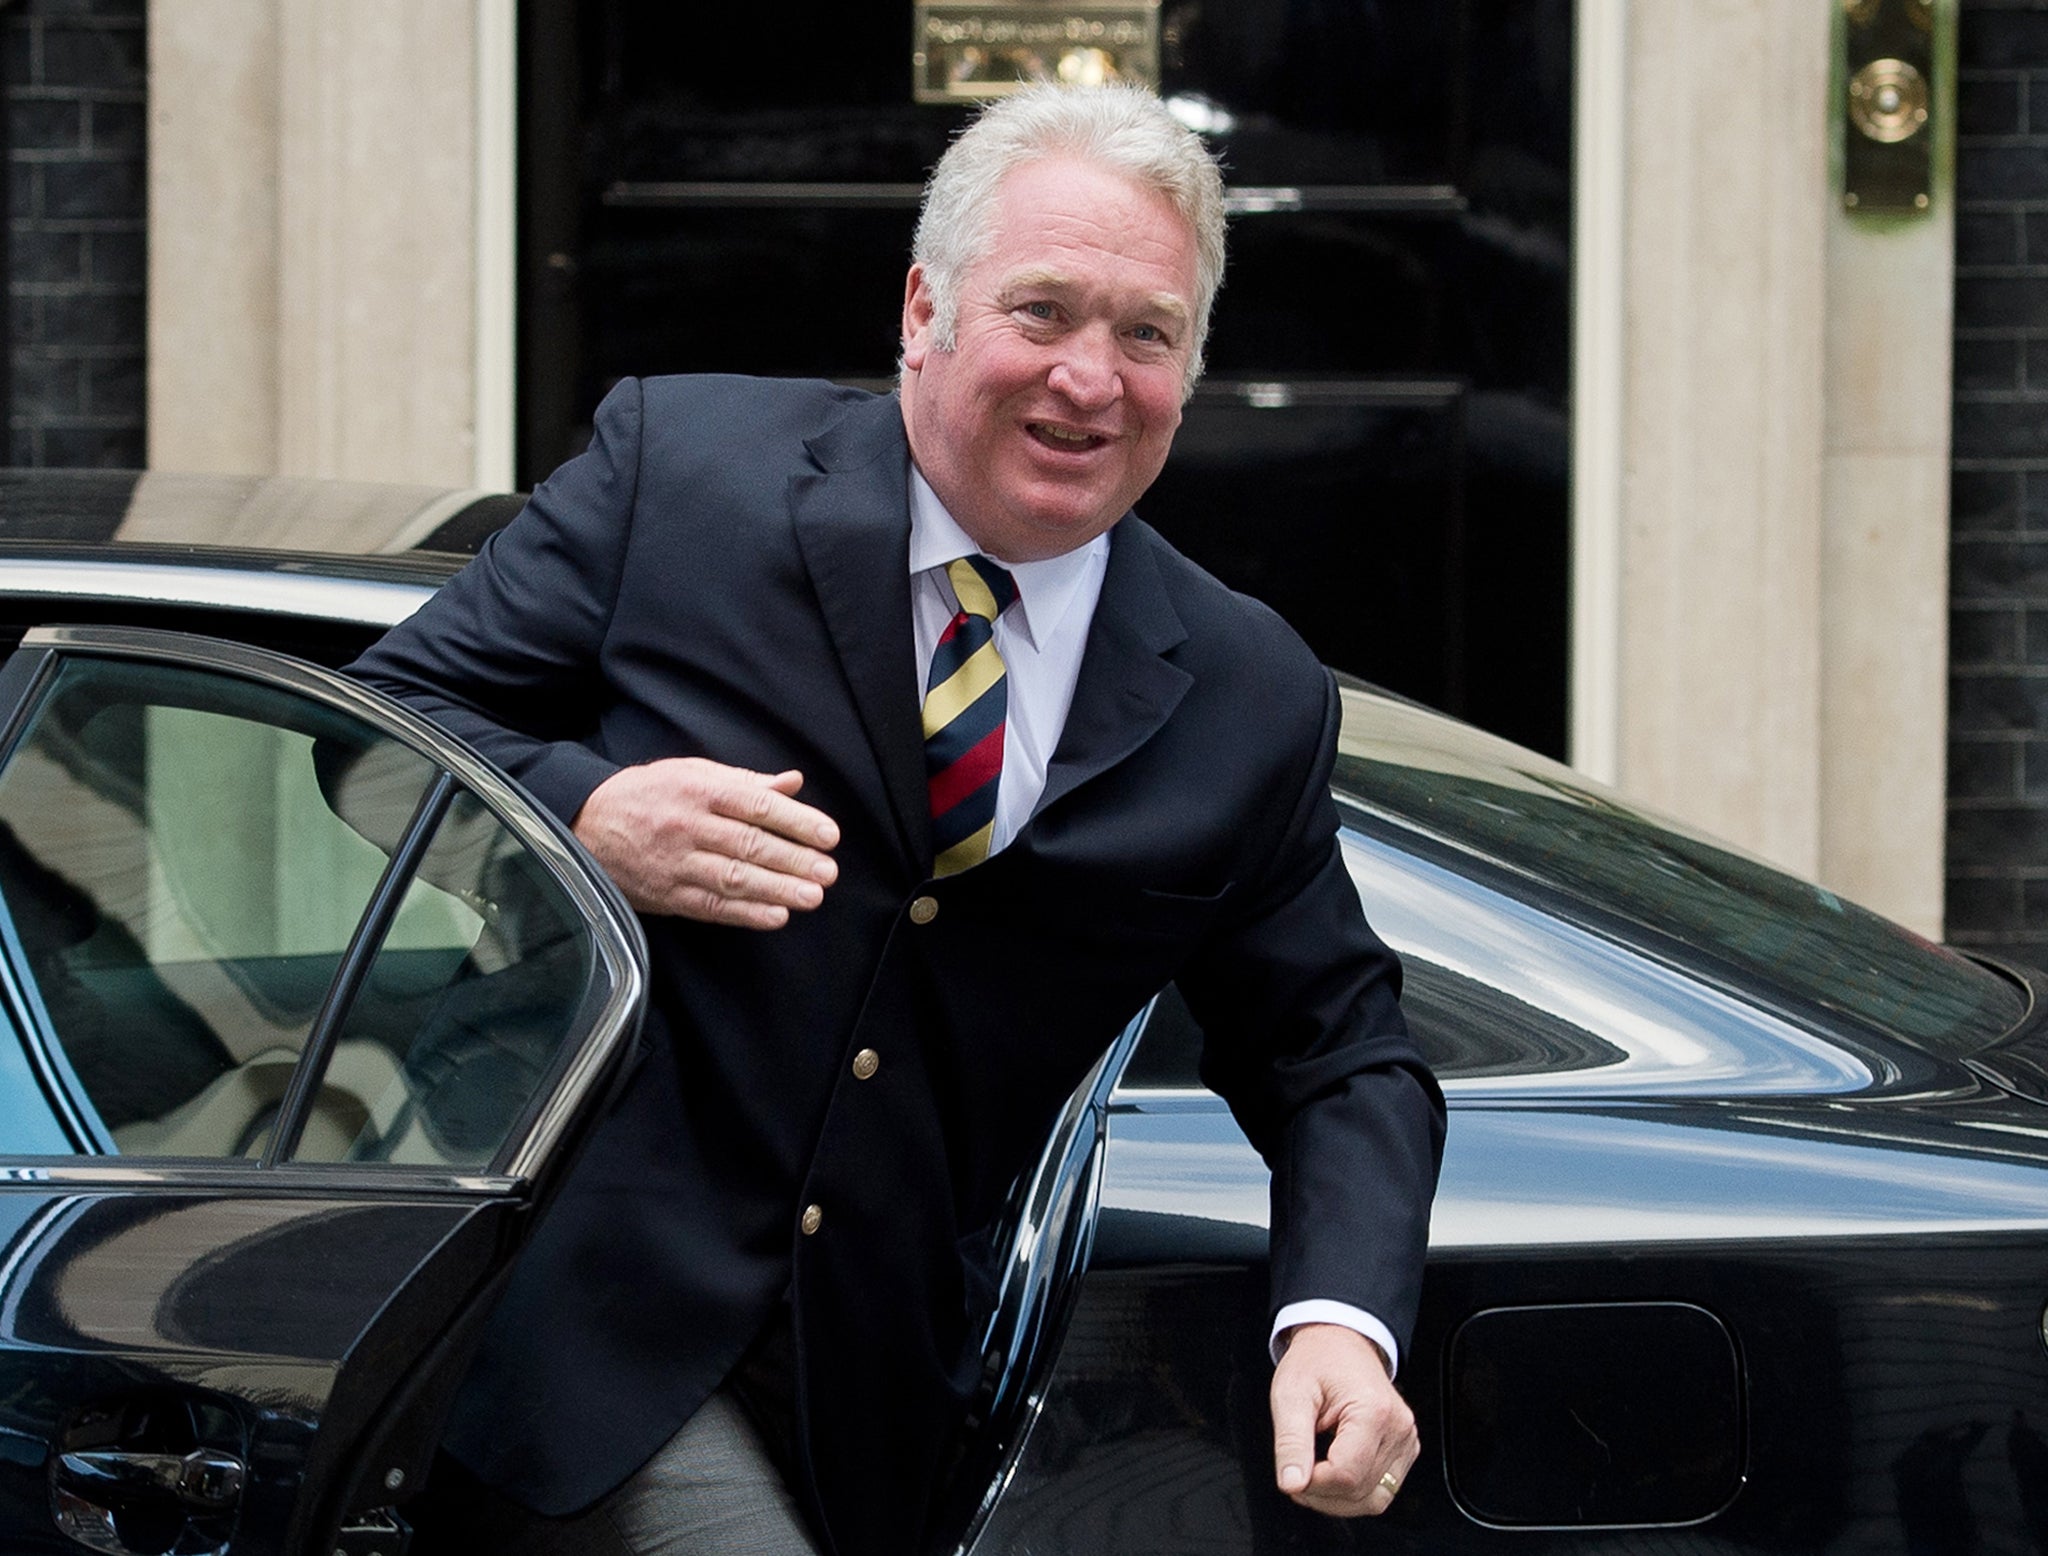 Mike Penning, Minister for Disabled People, said: 'I apologise, unreservedly, to the family as the minister responsible.'